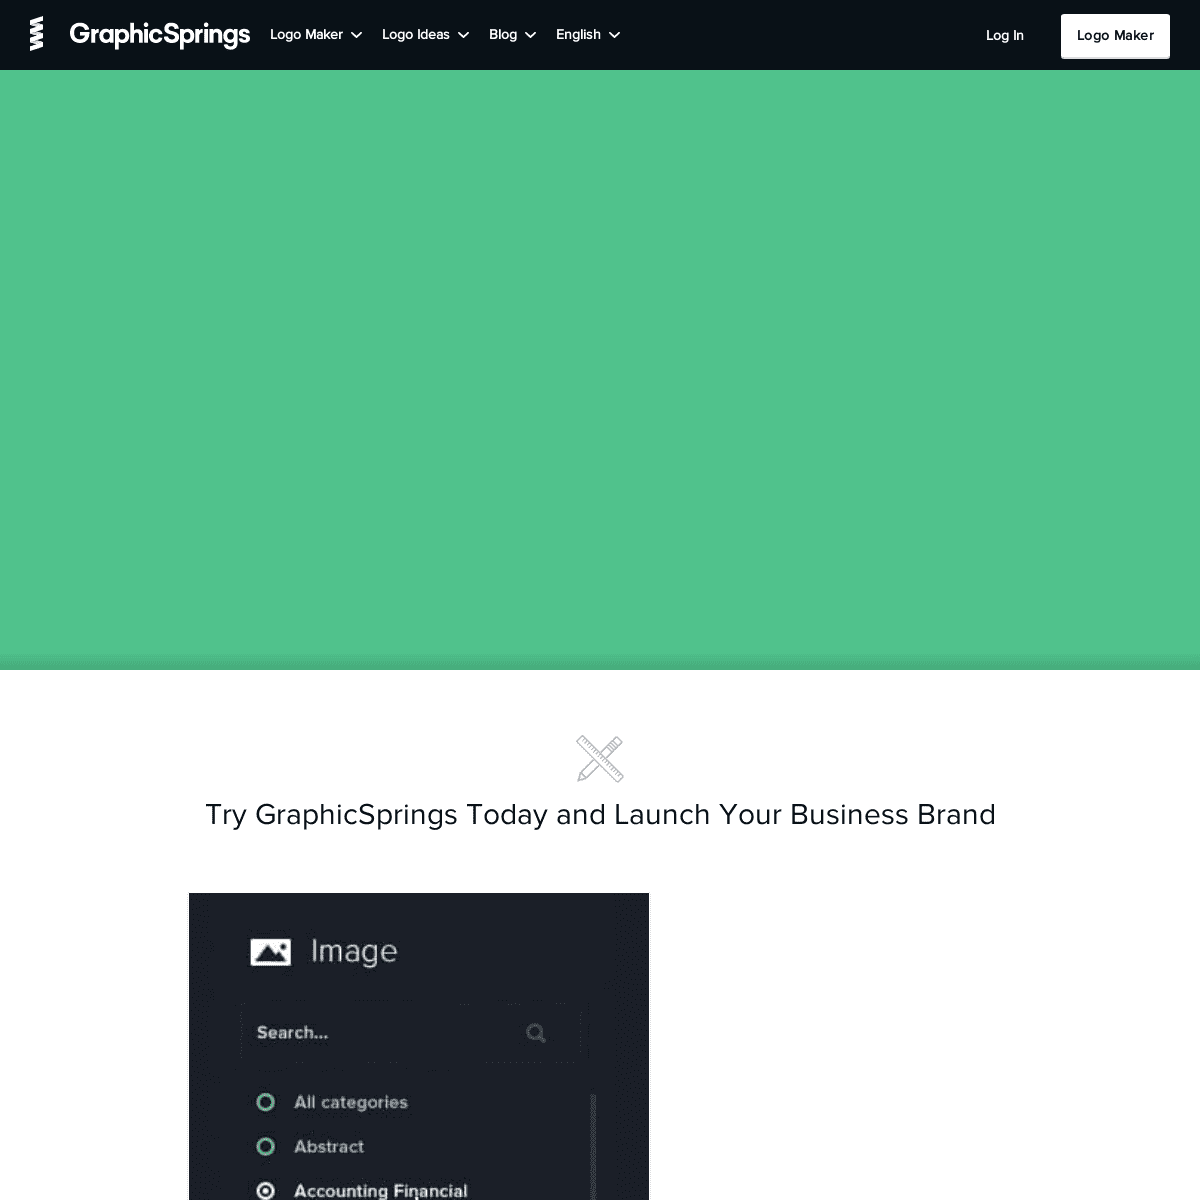 A complete backup of https://graphicsprings.com